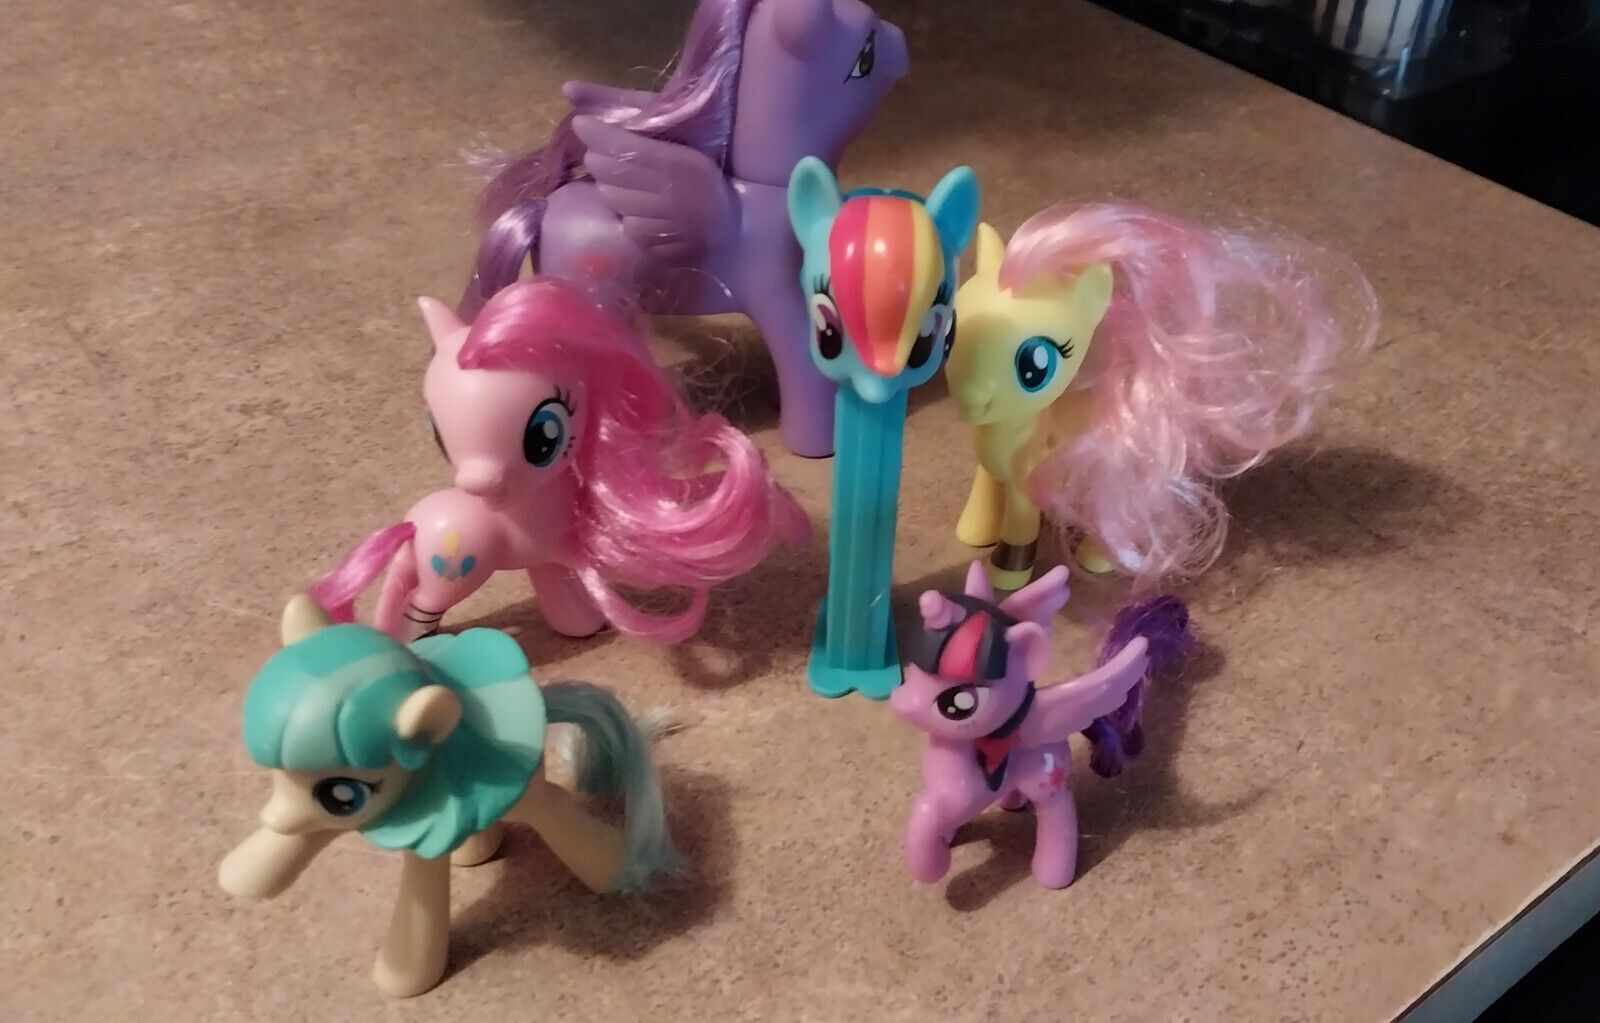 My Little Pony Lot Of 6 Varies in Sizes Includes One My Lil Pony Pez Dispenser